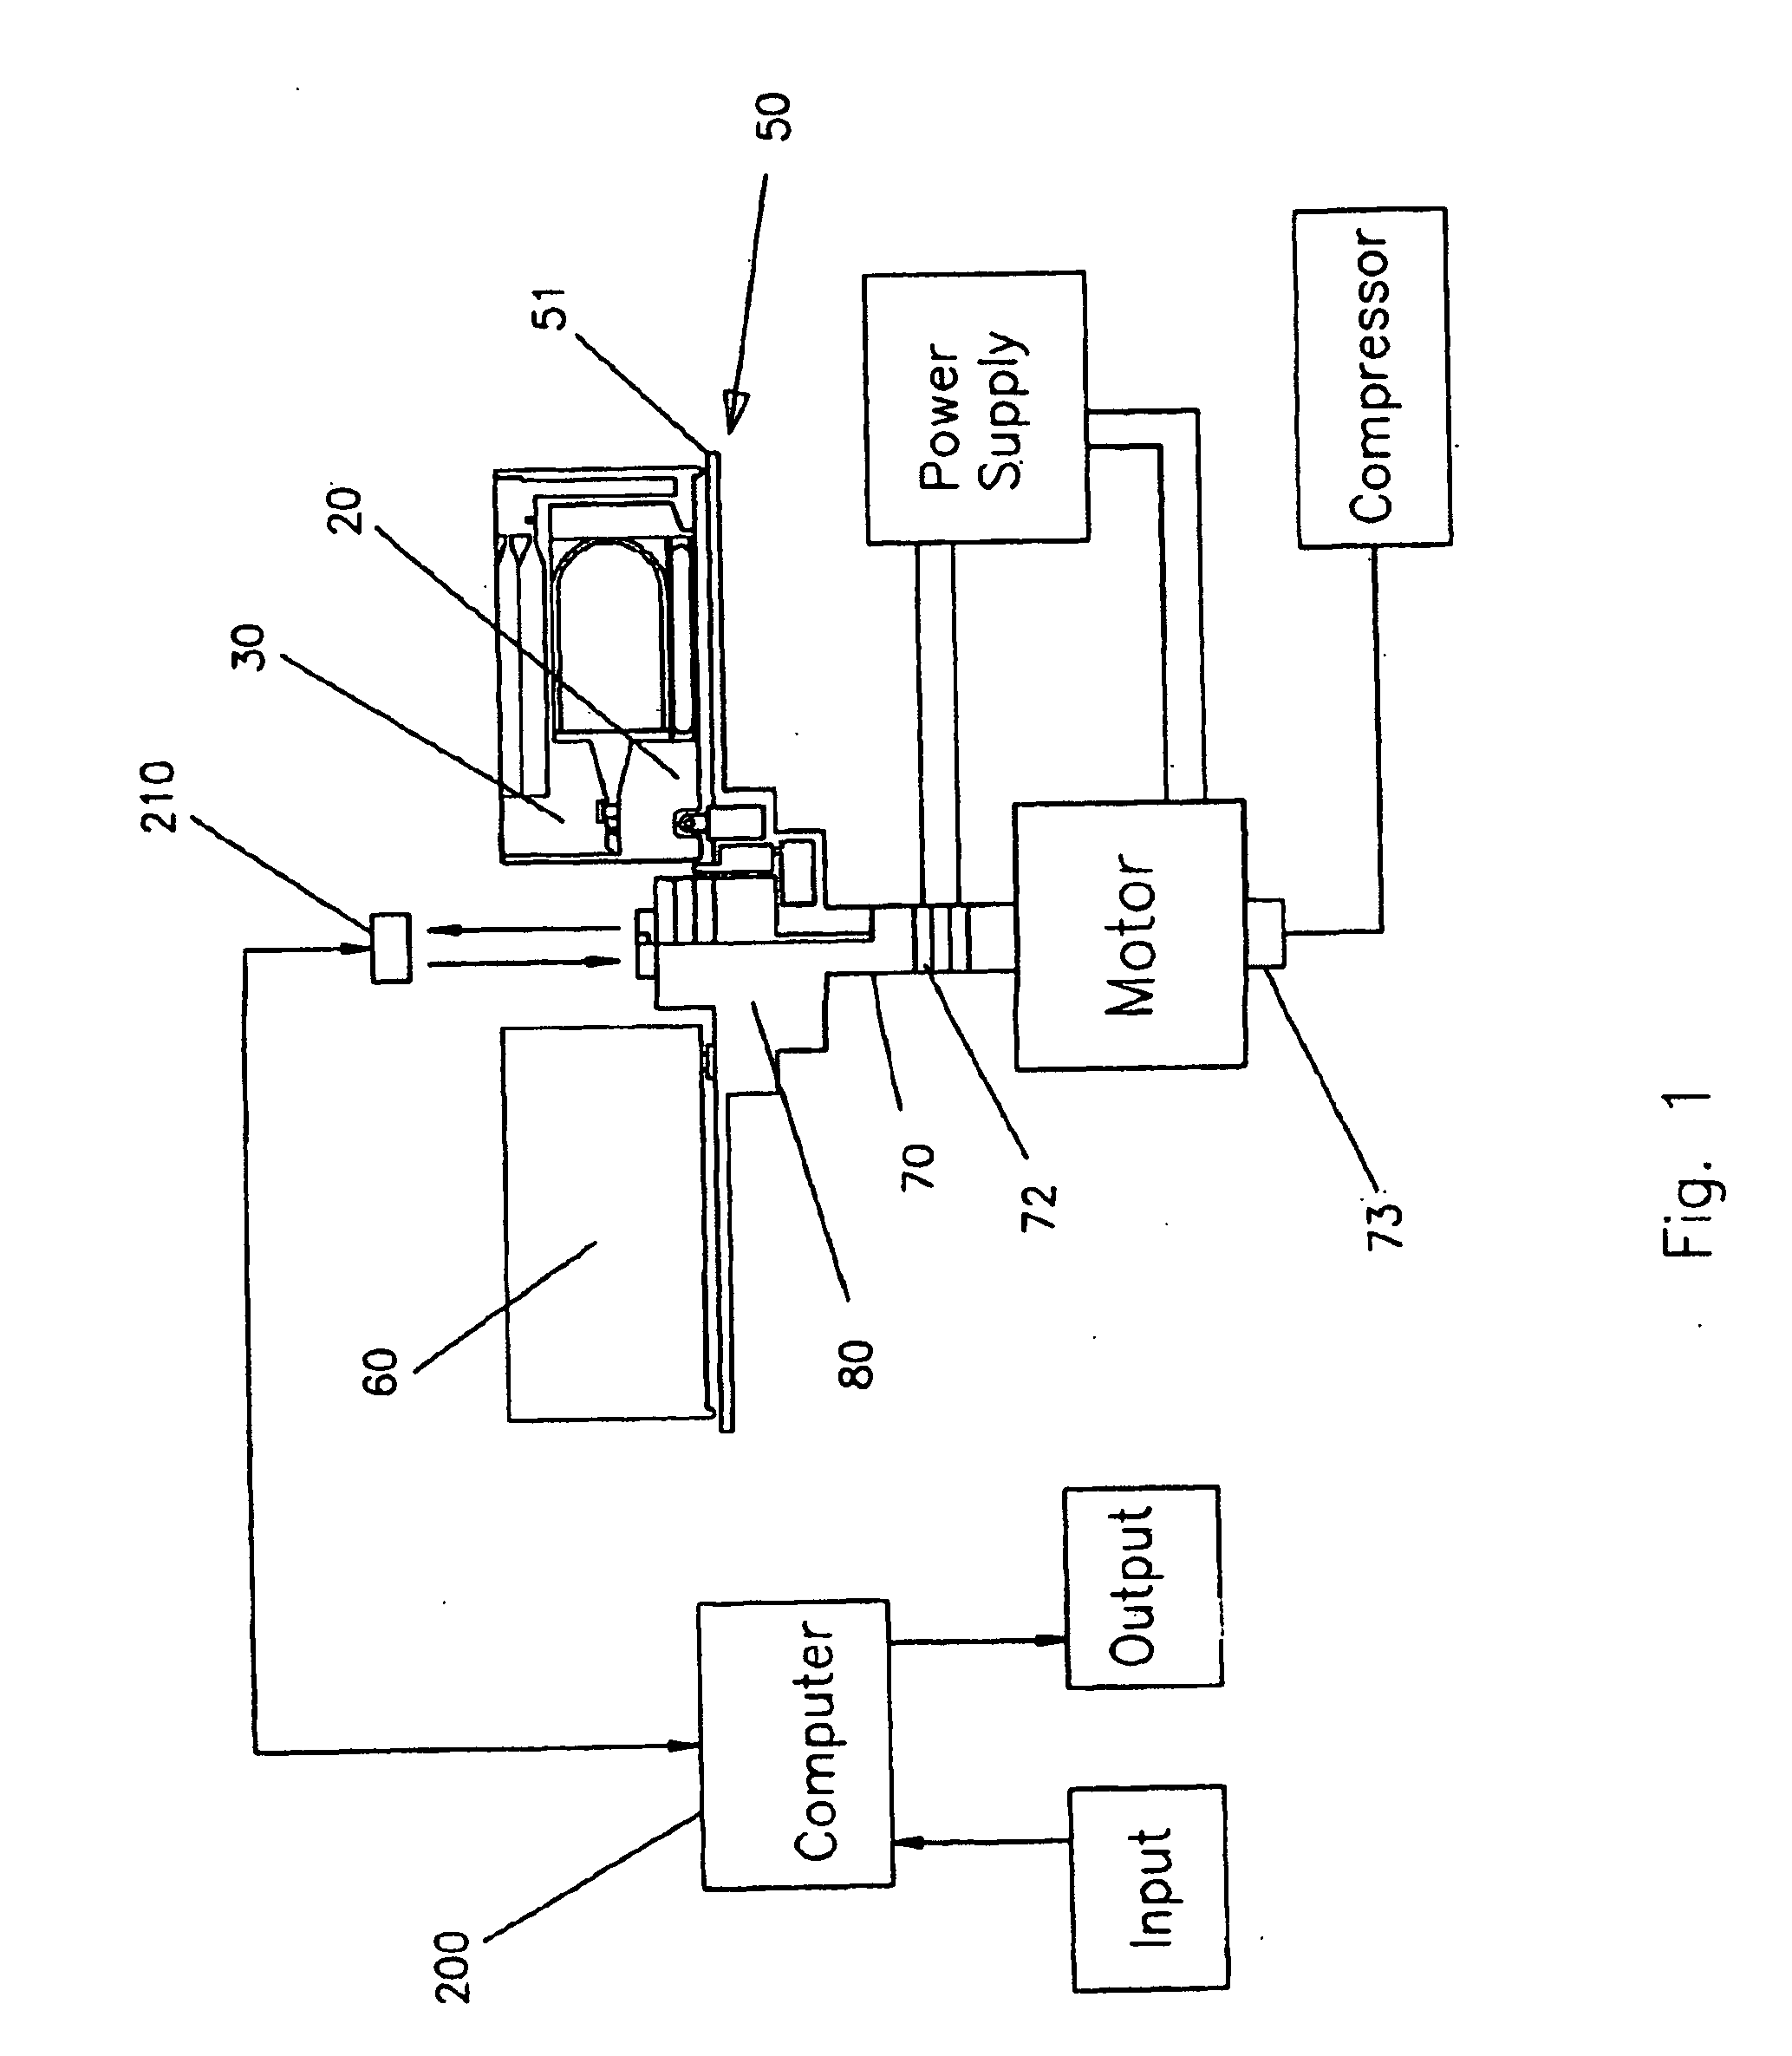 Automated system and method for blood components separation and processing